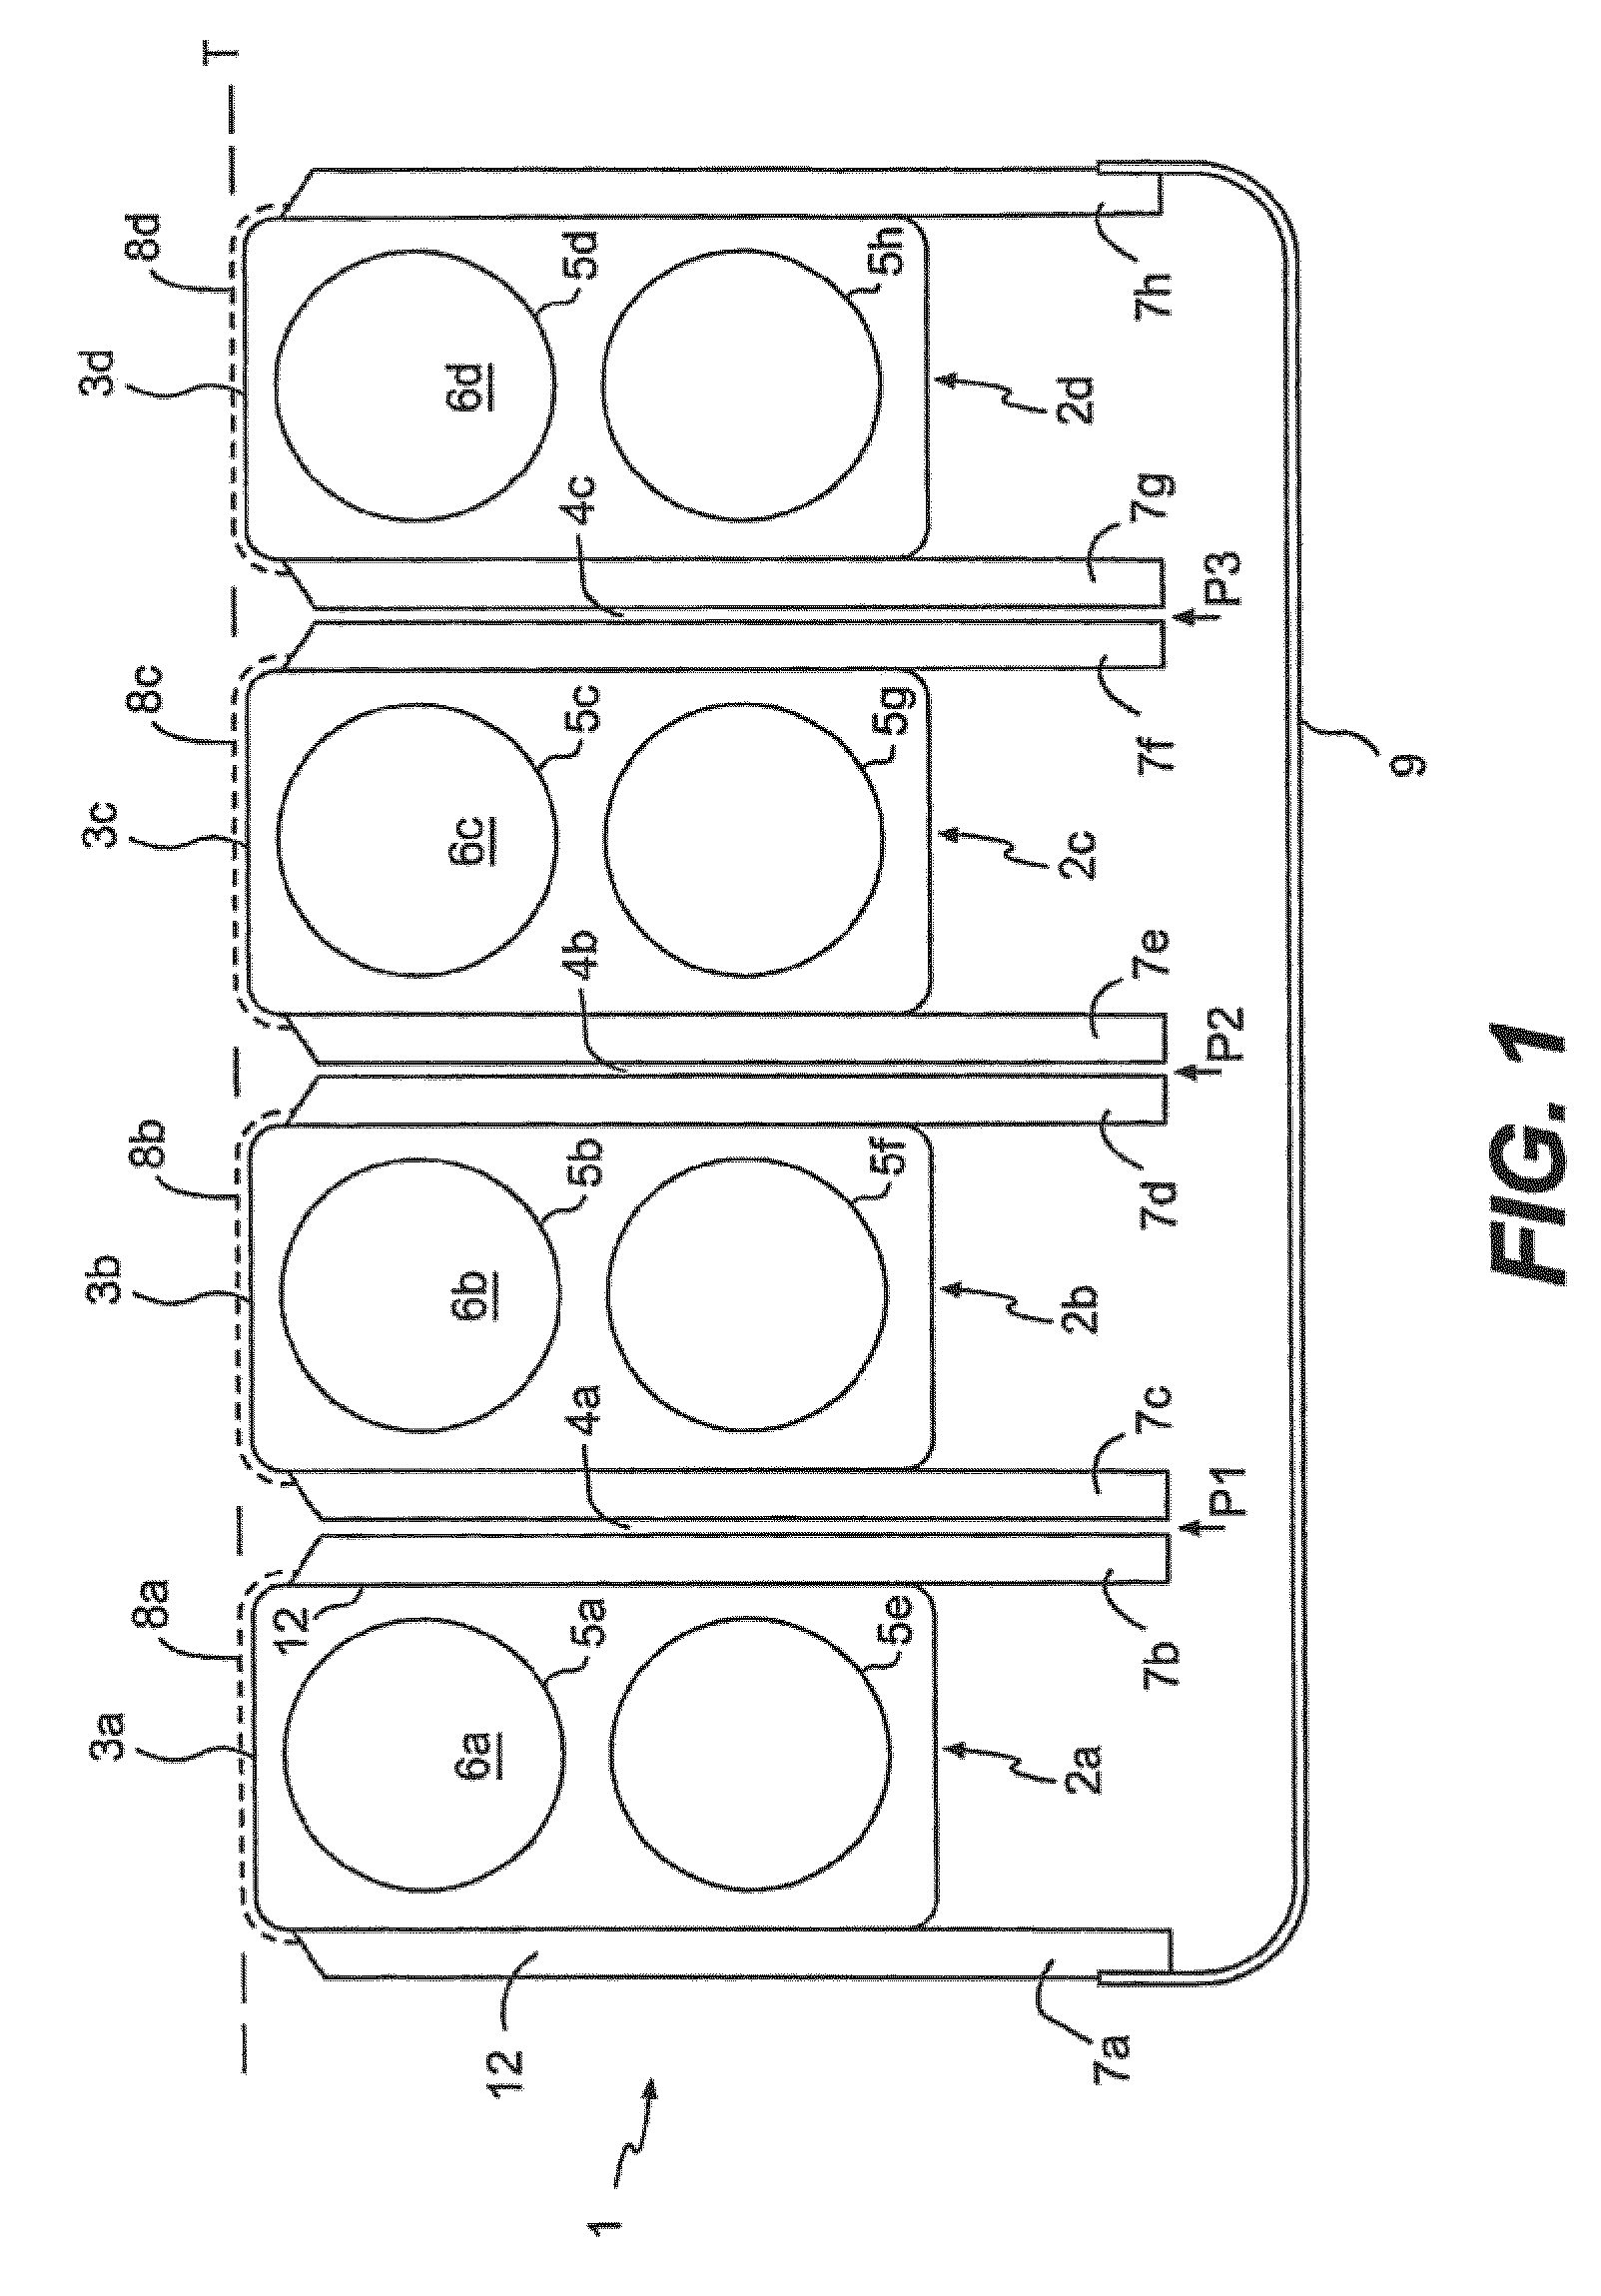 Surface dielectric barrier discharge plasma unit and a method of generating a surface plasma